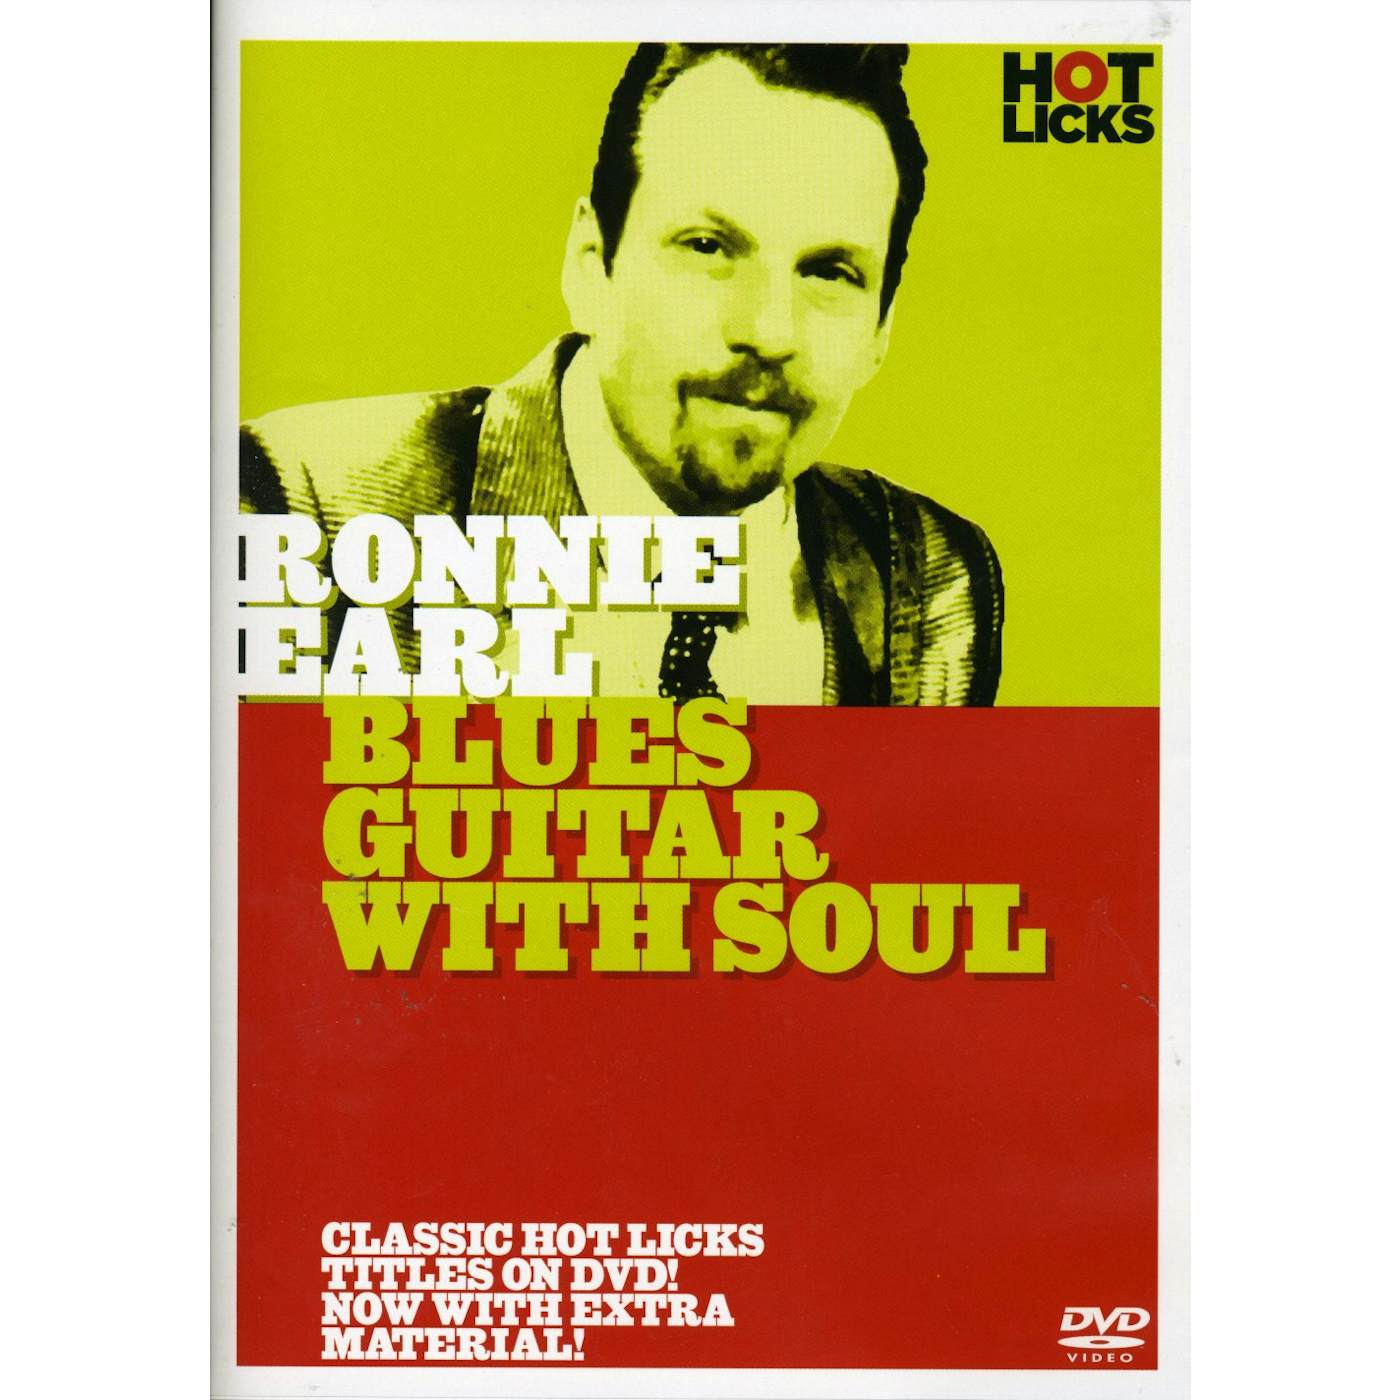 Ronnie Earl BLUES GUITAR WITH SOUL DVD